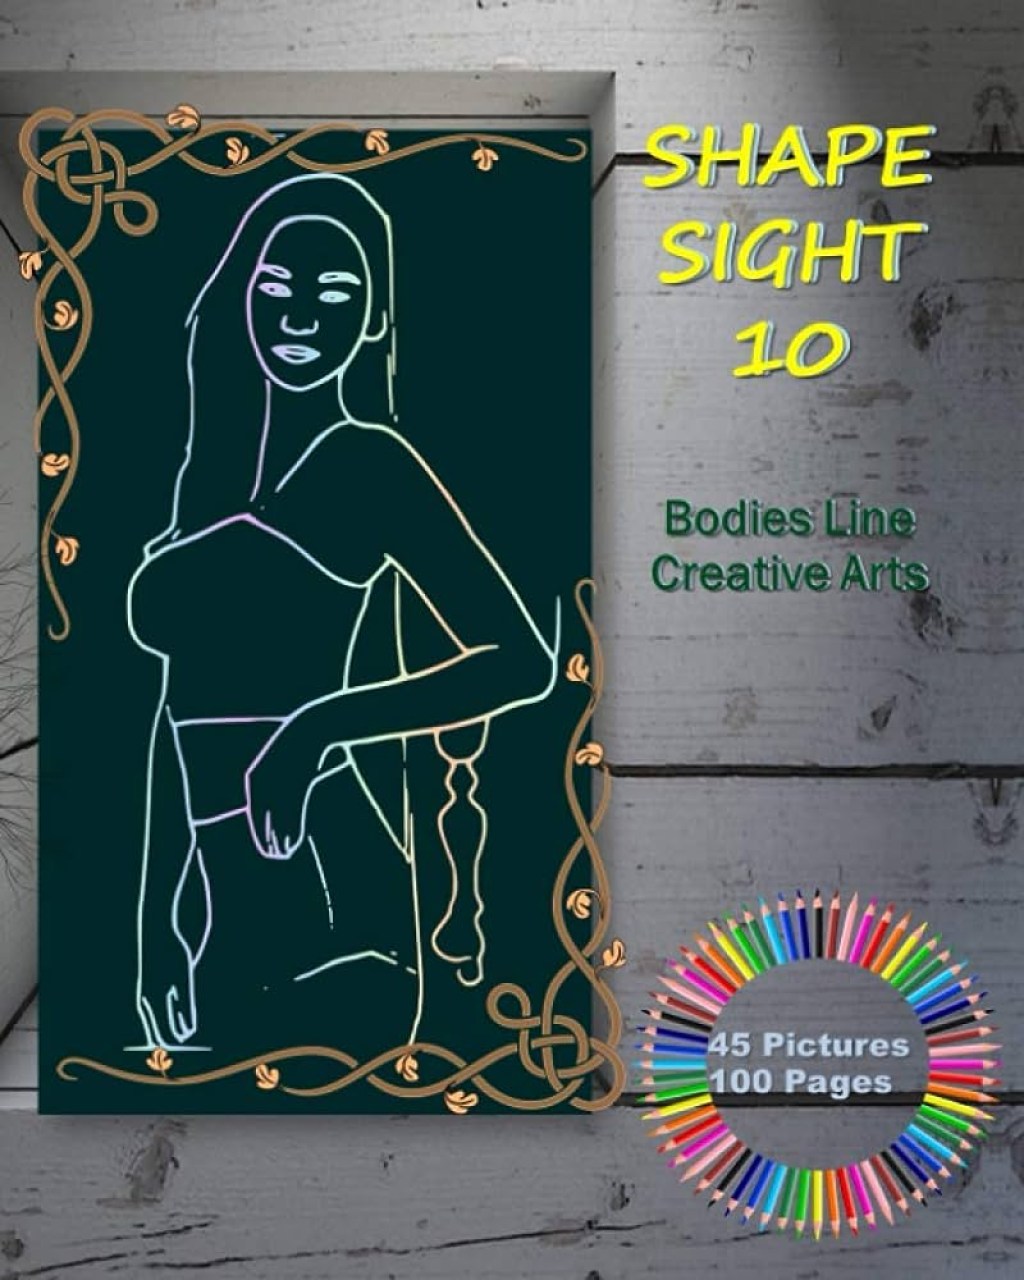 SHAPE SIGHT  - BODIES LINE CREATIVE ARTS: Female Body Drawing Practice  book  Create more Line Art - Painting  size ”x ”  Pictures 0  Pages,